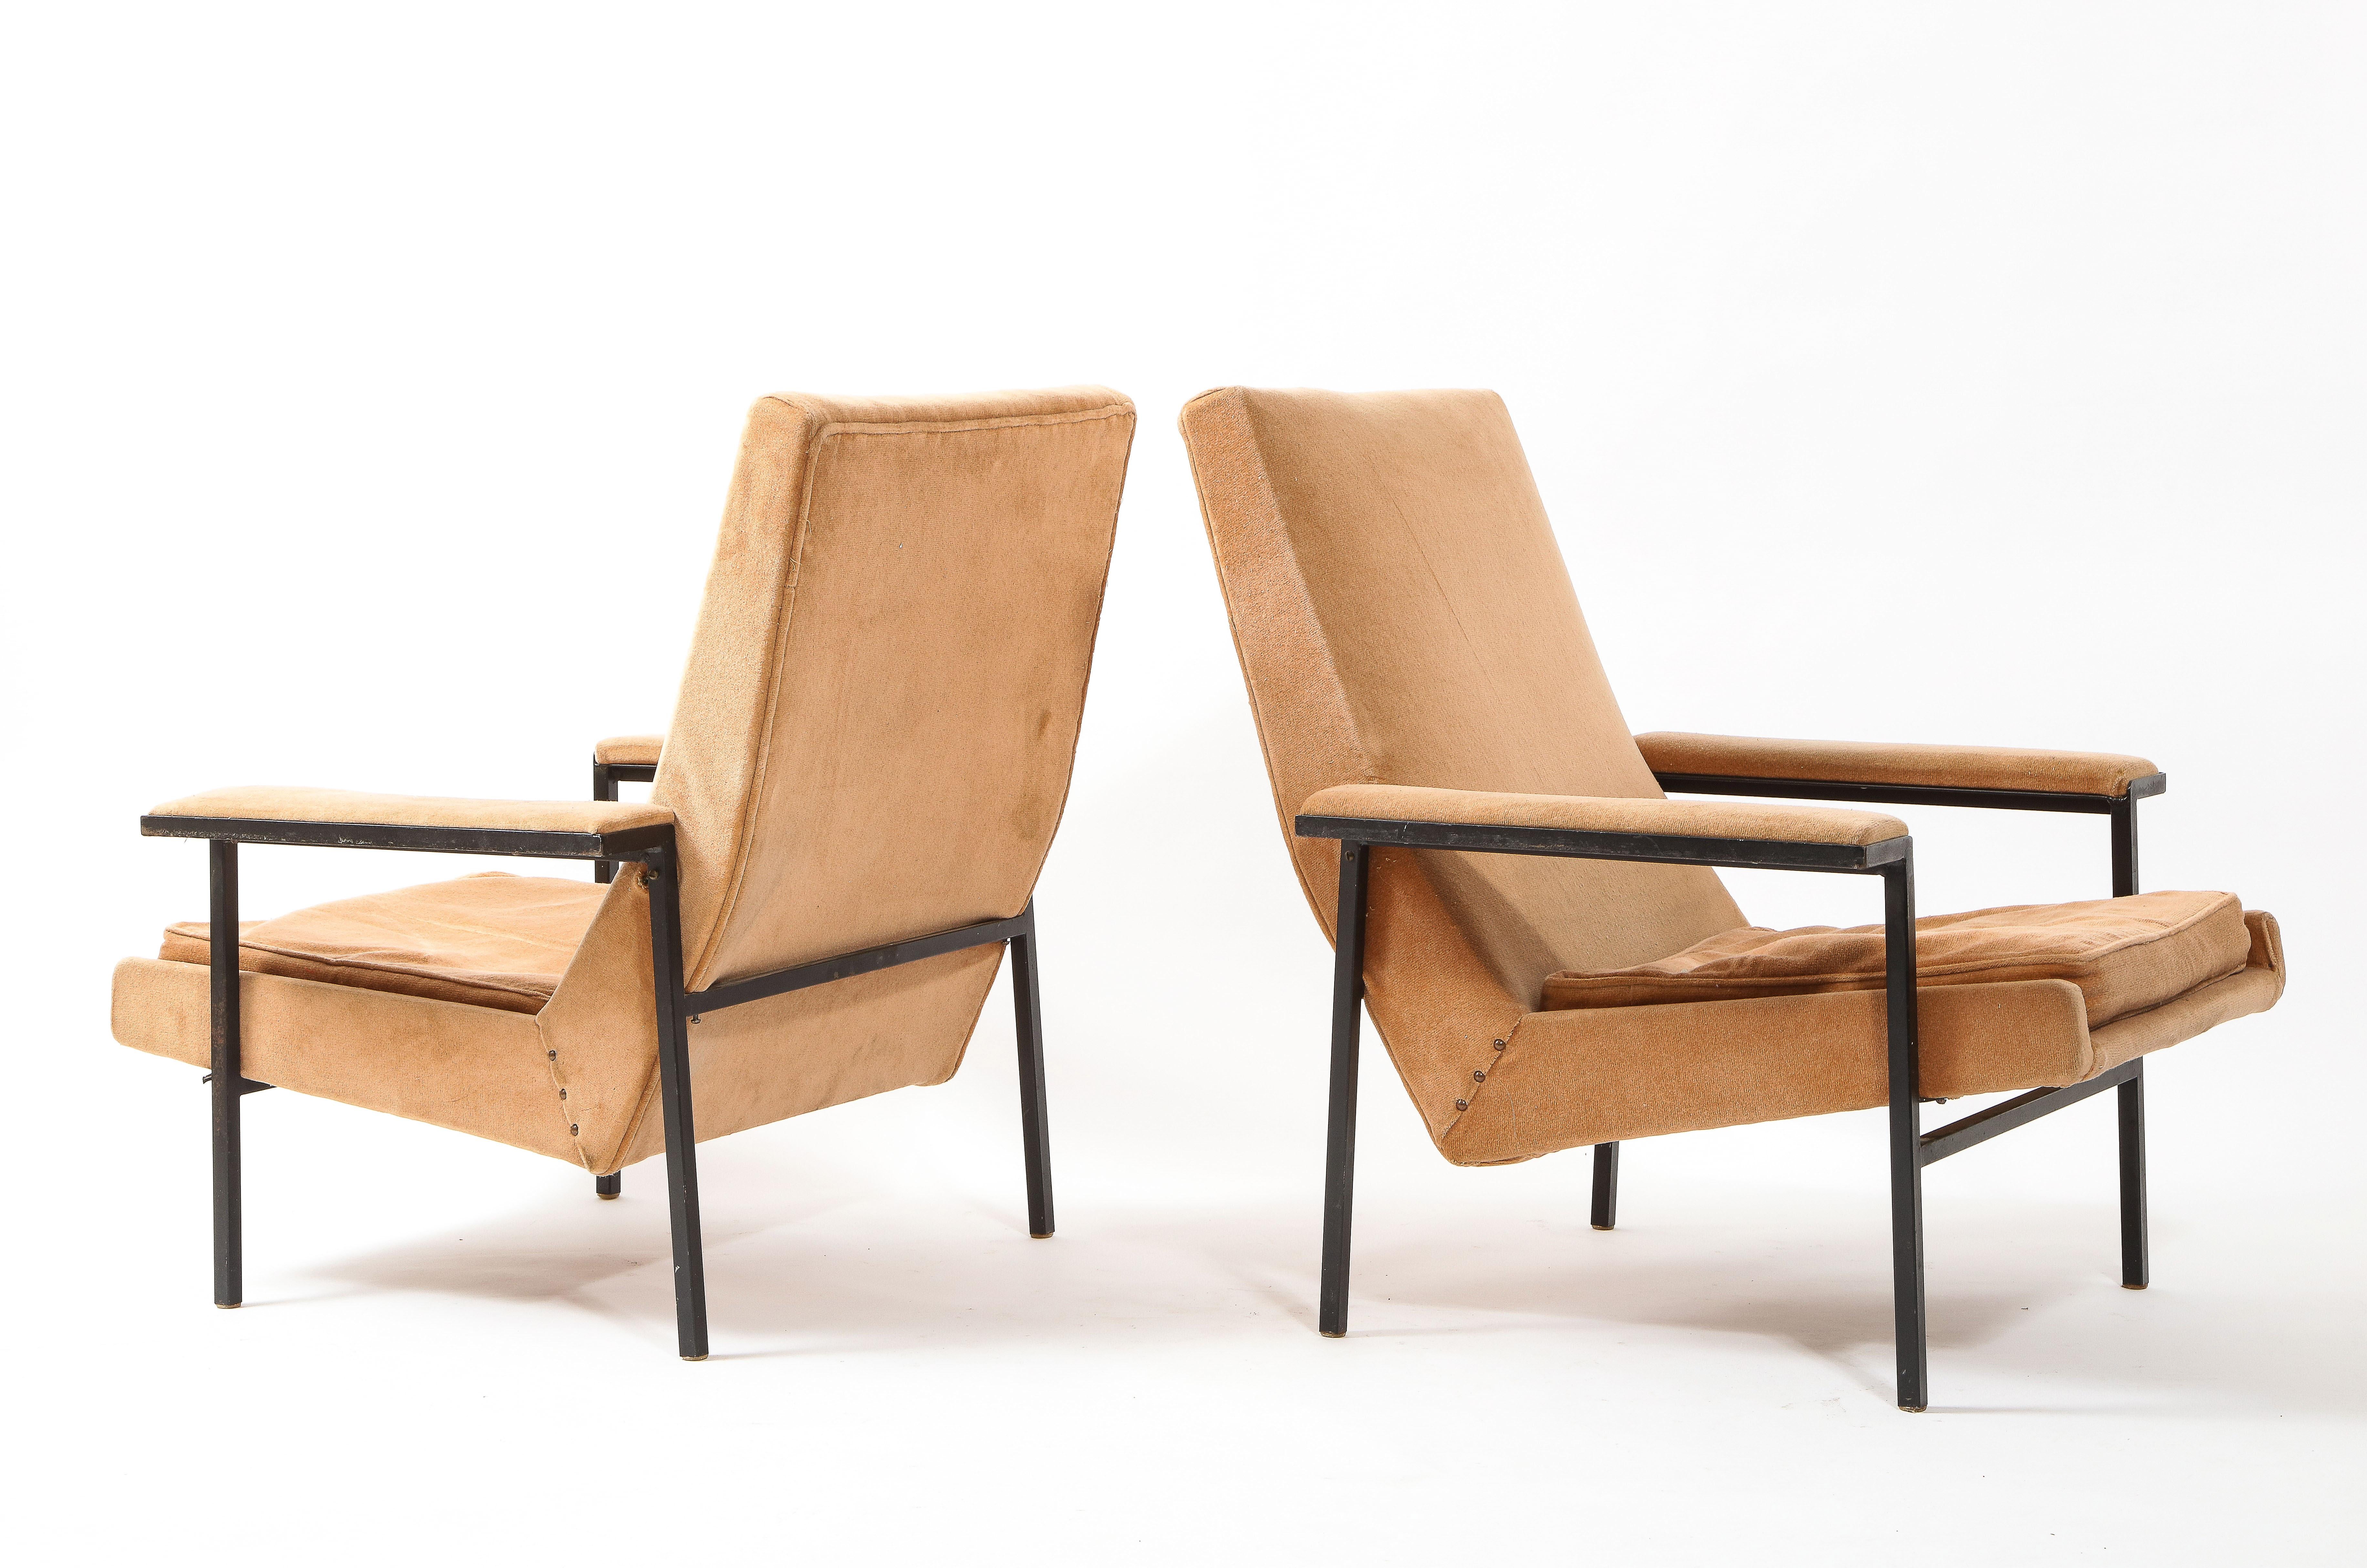 Steel A.R.P Guariche, Motte, Mortier Pair of Armchairs, France 1955 For Sale